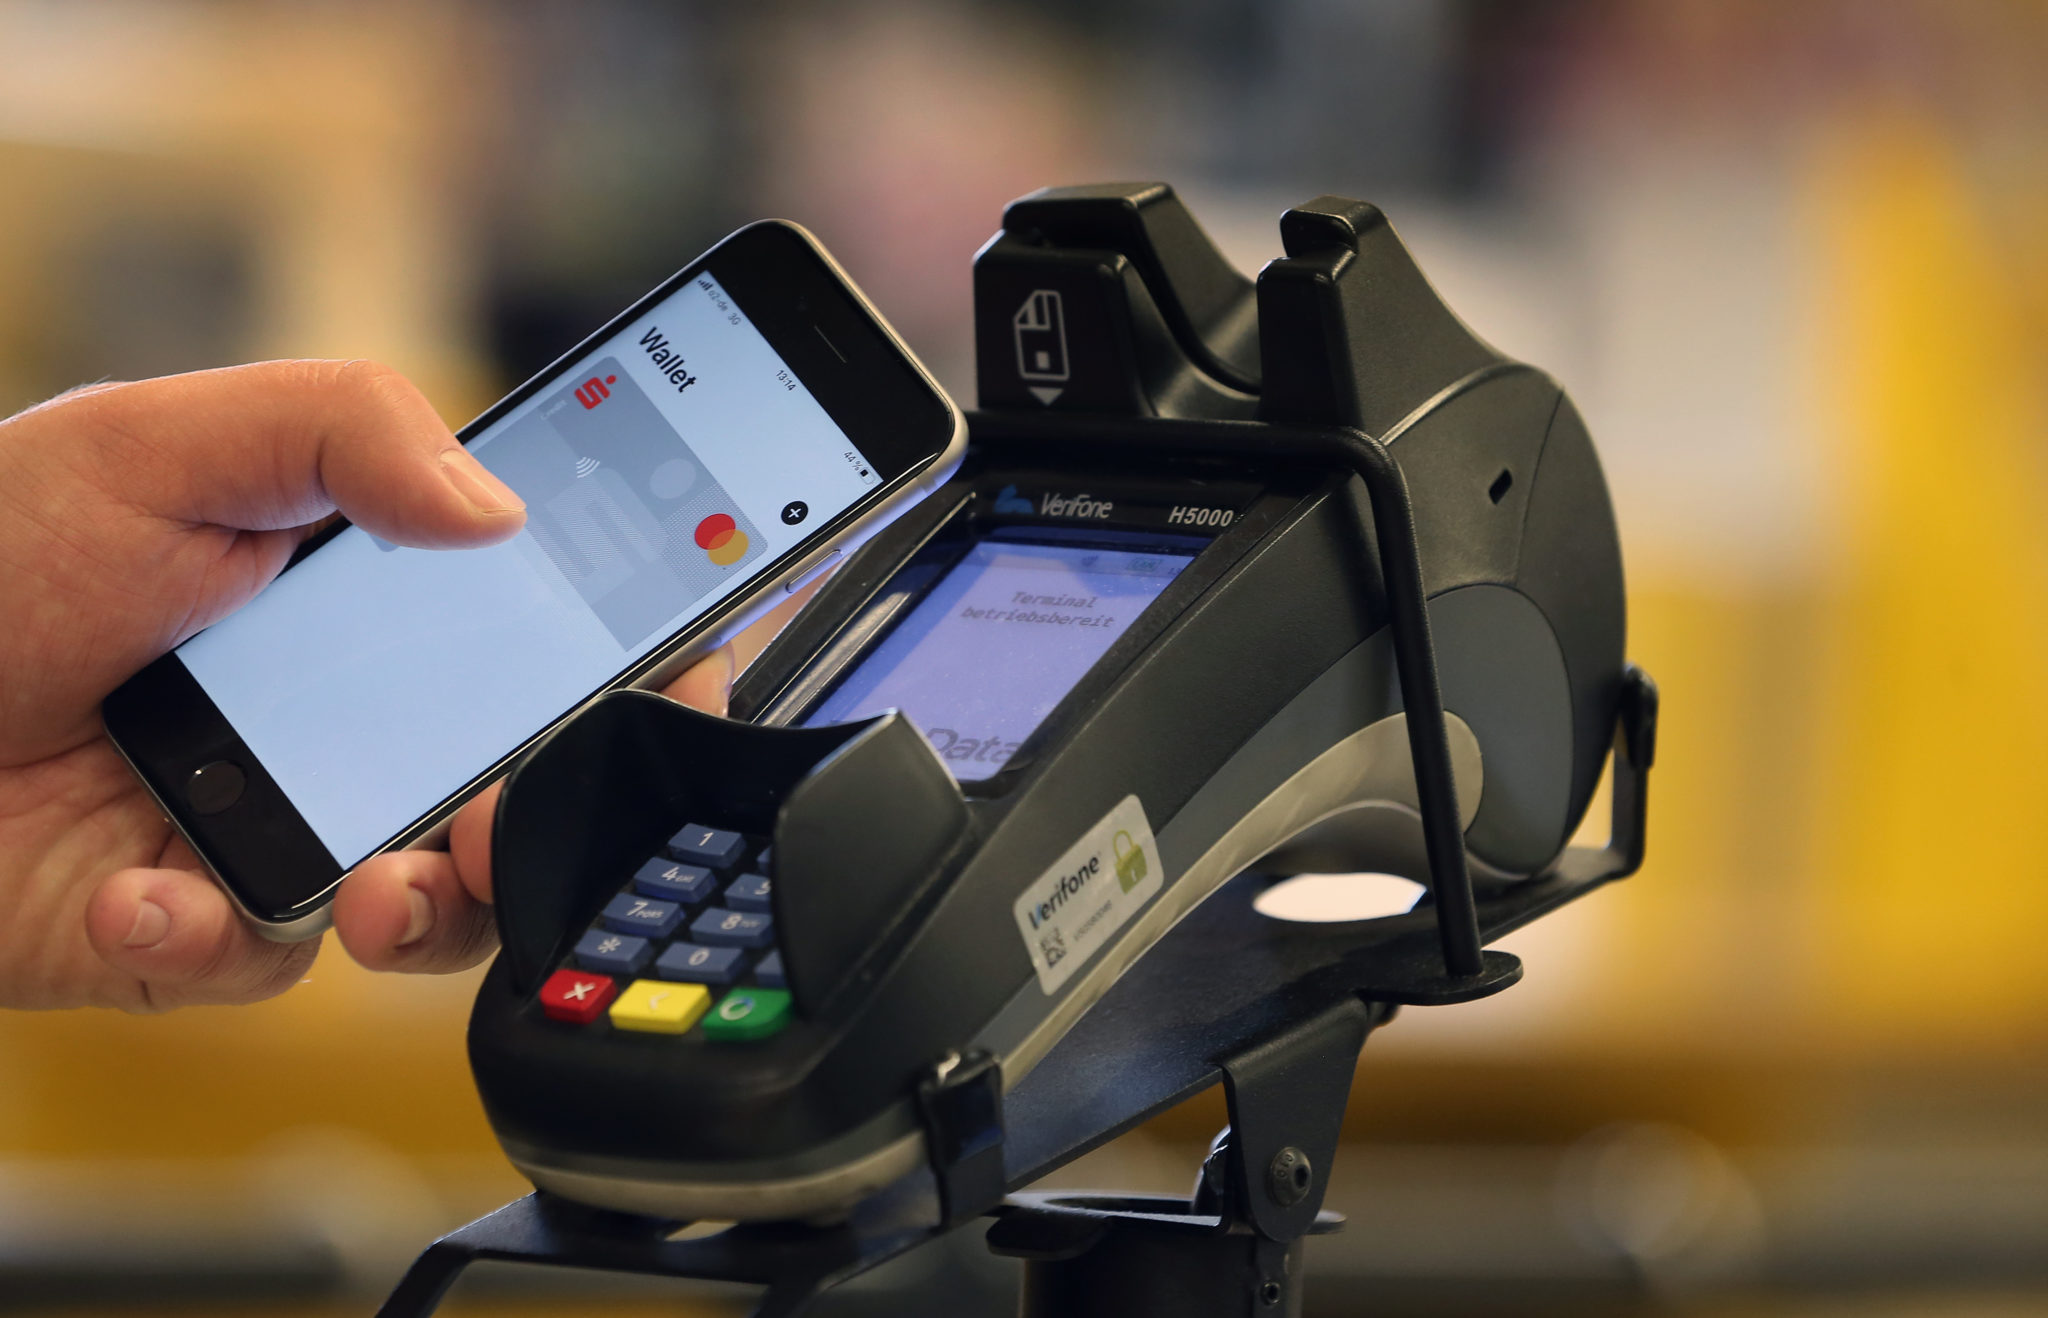 A smartphone is held at a payment terminal at the checkout of a supermarket in January 2020